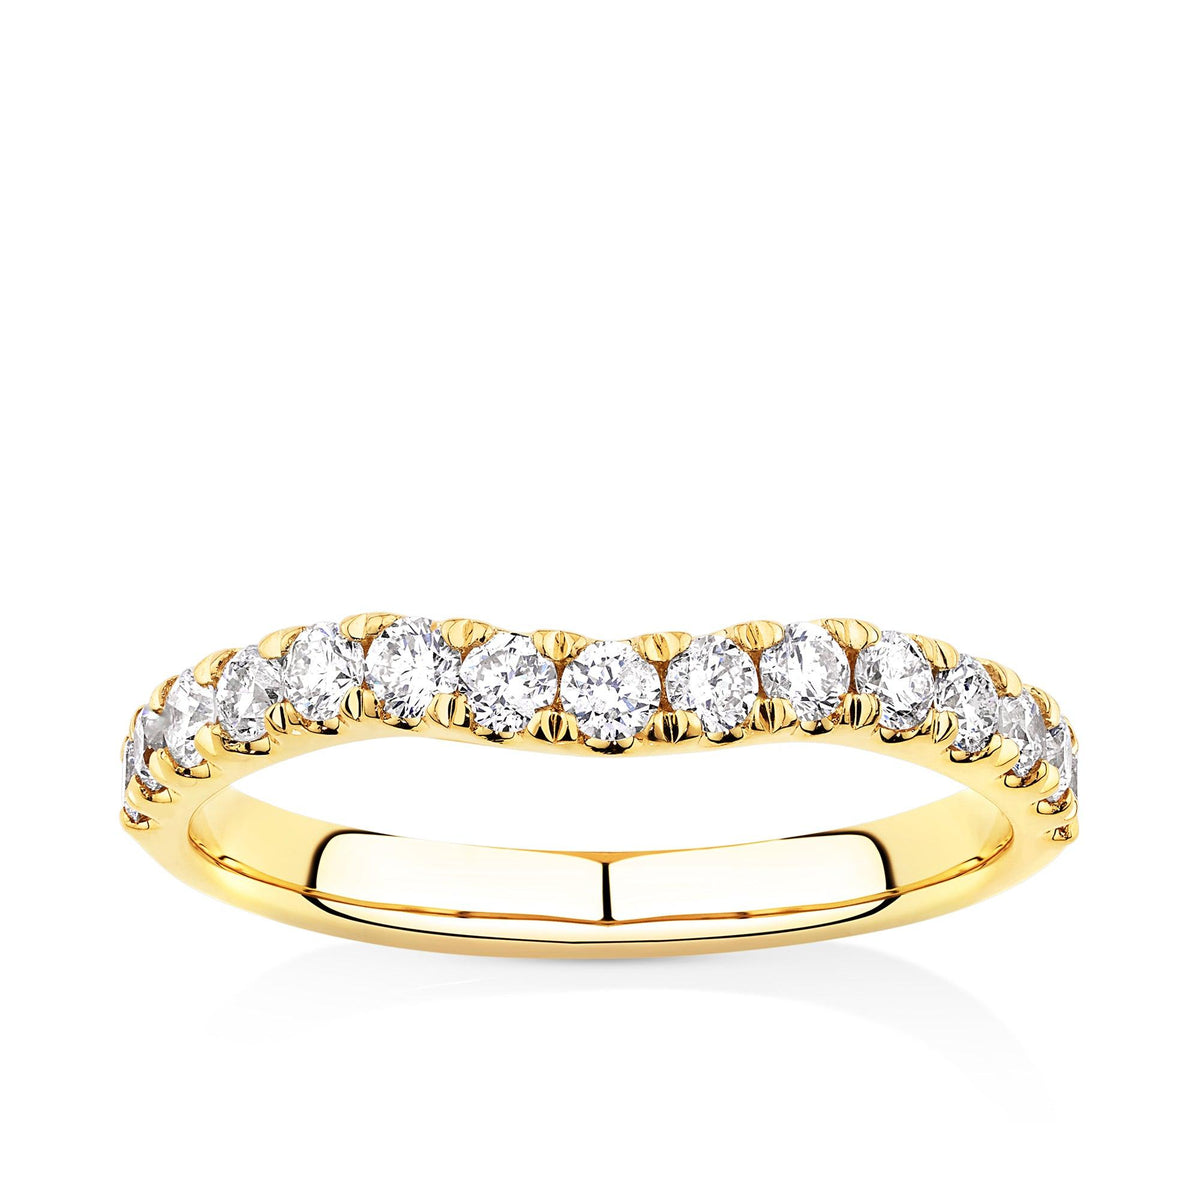 0.50ct TW Diamond Contour Wedding Band in 18ct Yellow Gold - Wallace Bishop